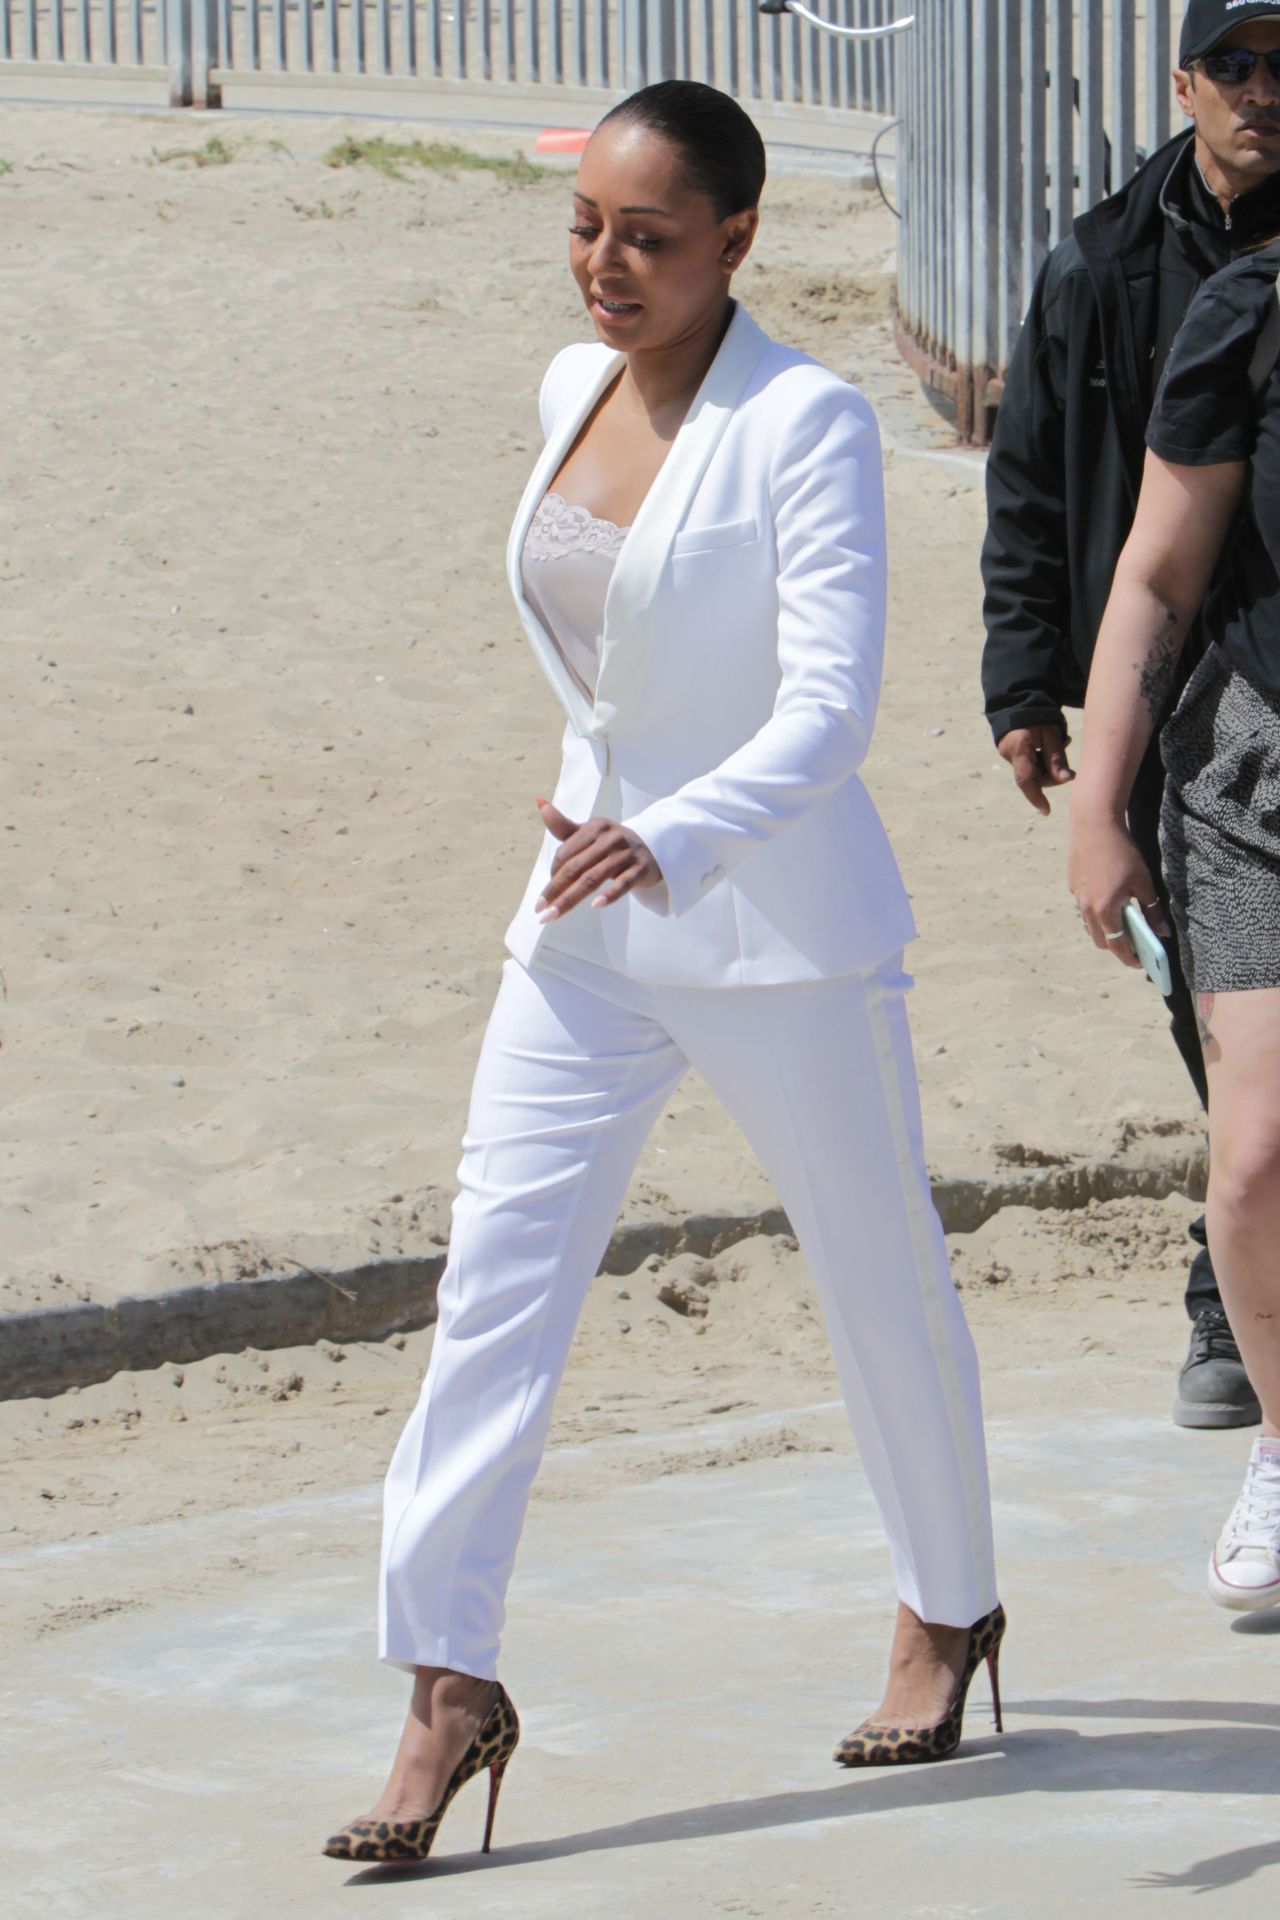 melanie-brown-today-show-hosted-by-kathie-gifford-hoda-at-venice-beach-in-venice-05-25-2018-11.jpg